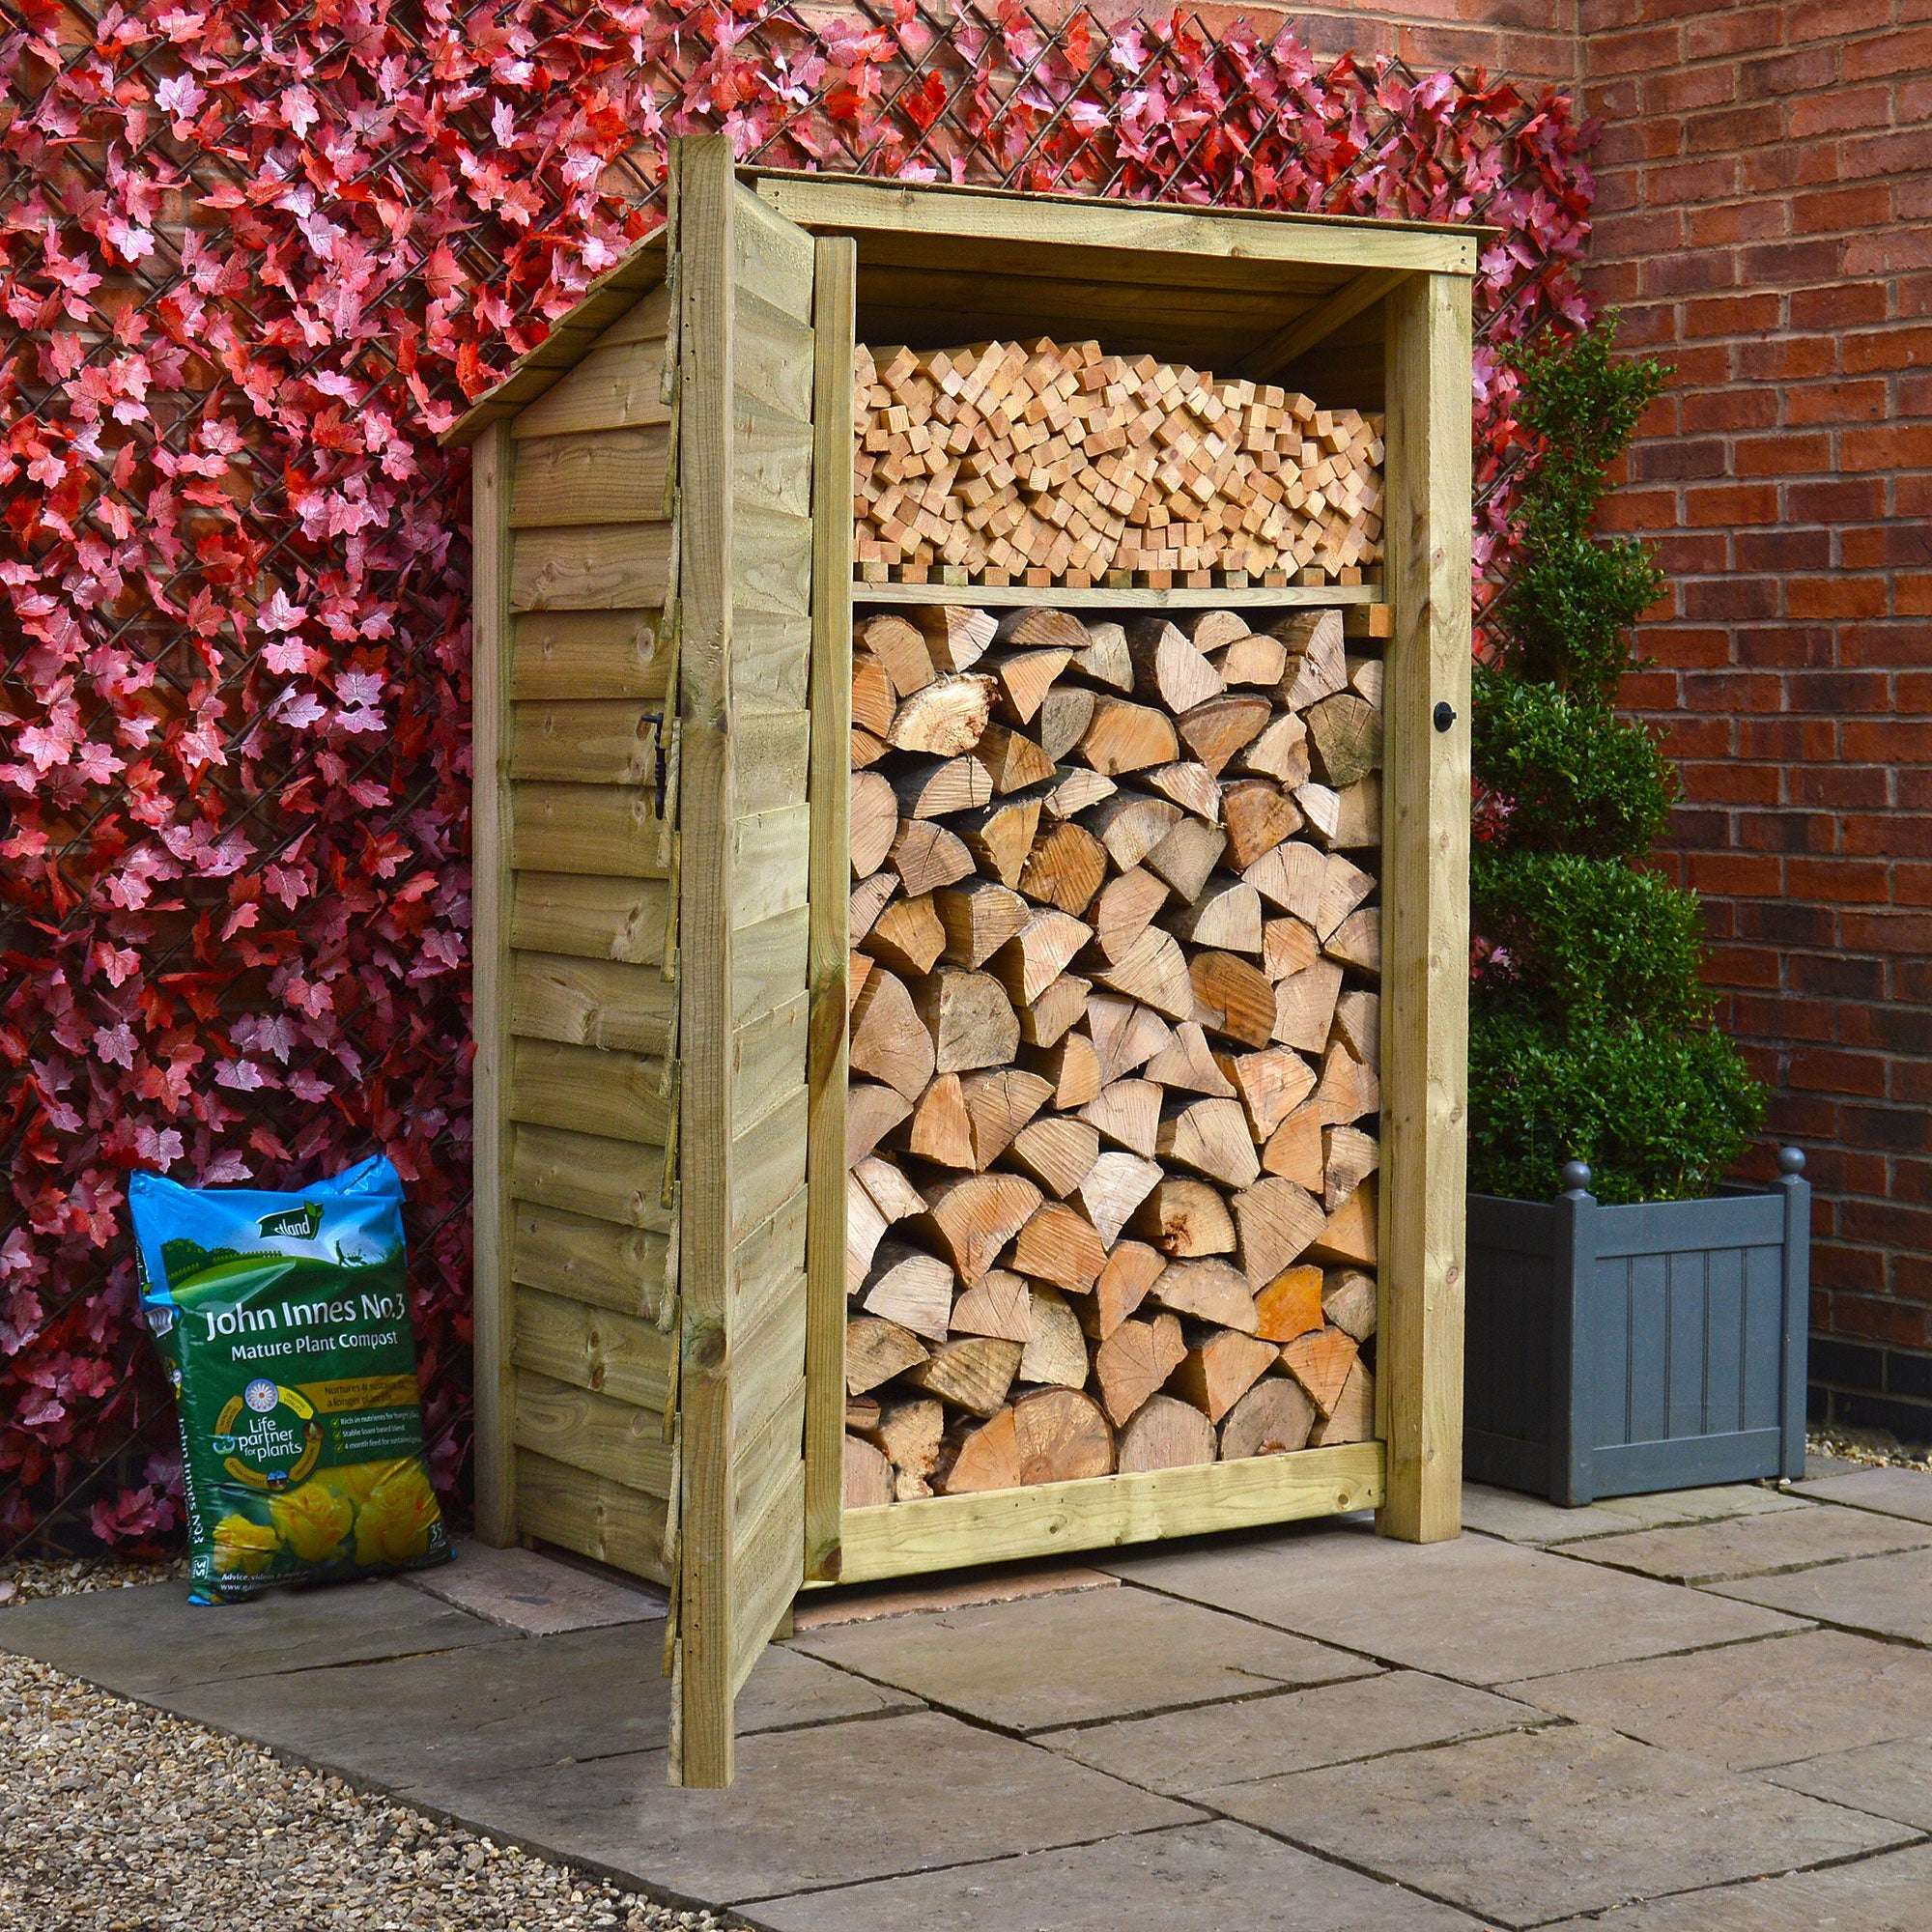 Rutland Country Greetham Log Store With Kindling Shelf and Door - 6ft:Rutland County,Exceptional Garden